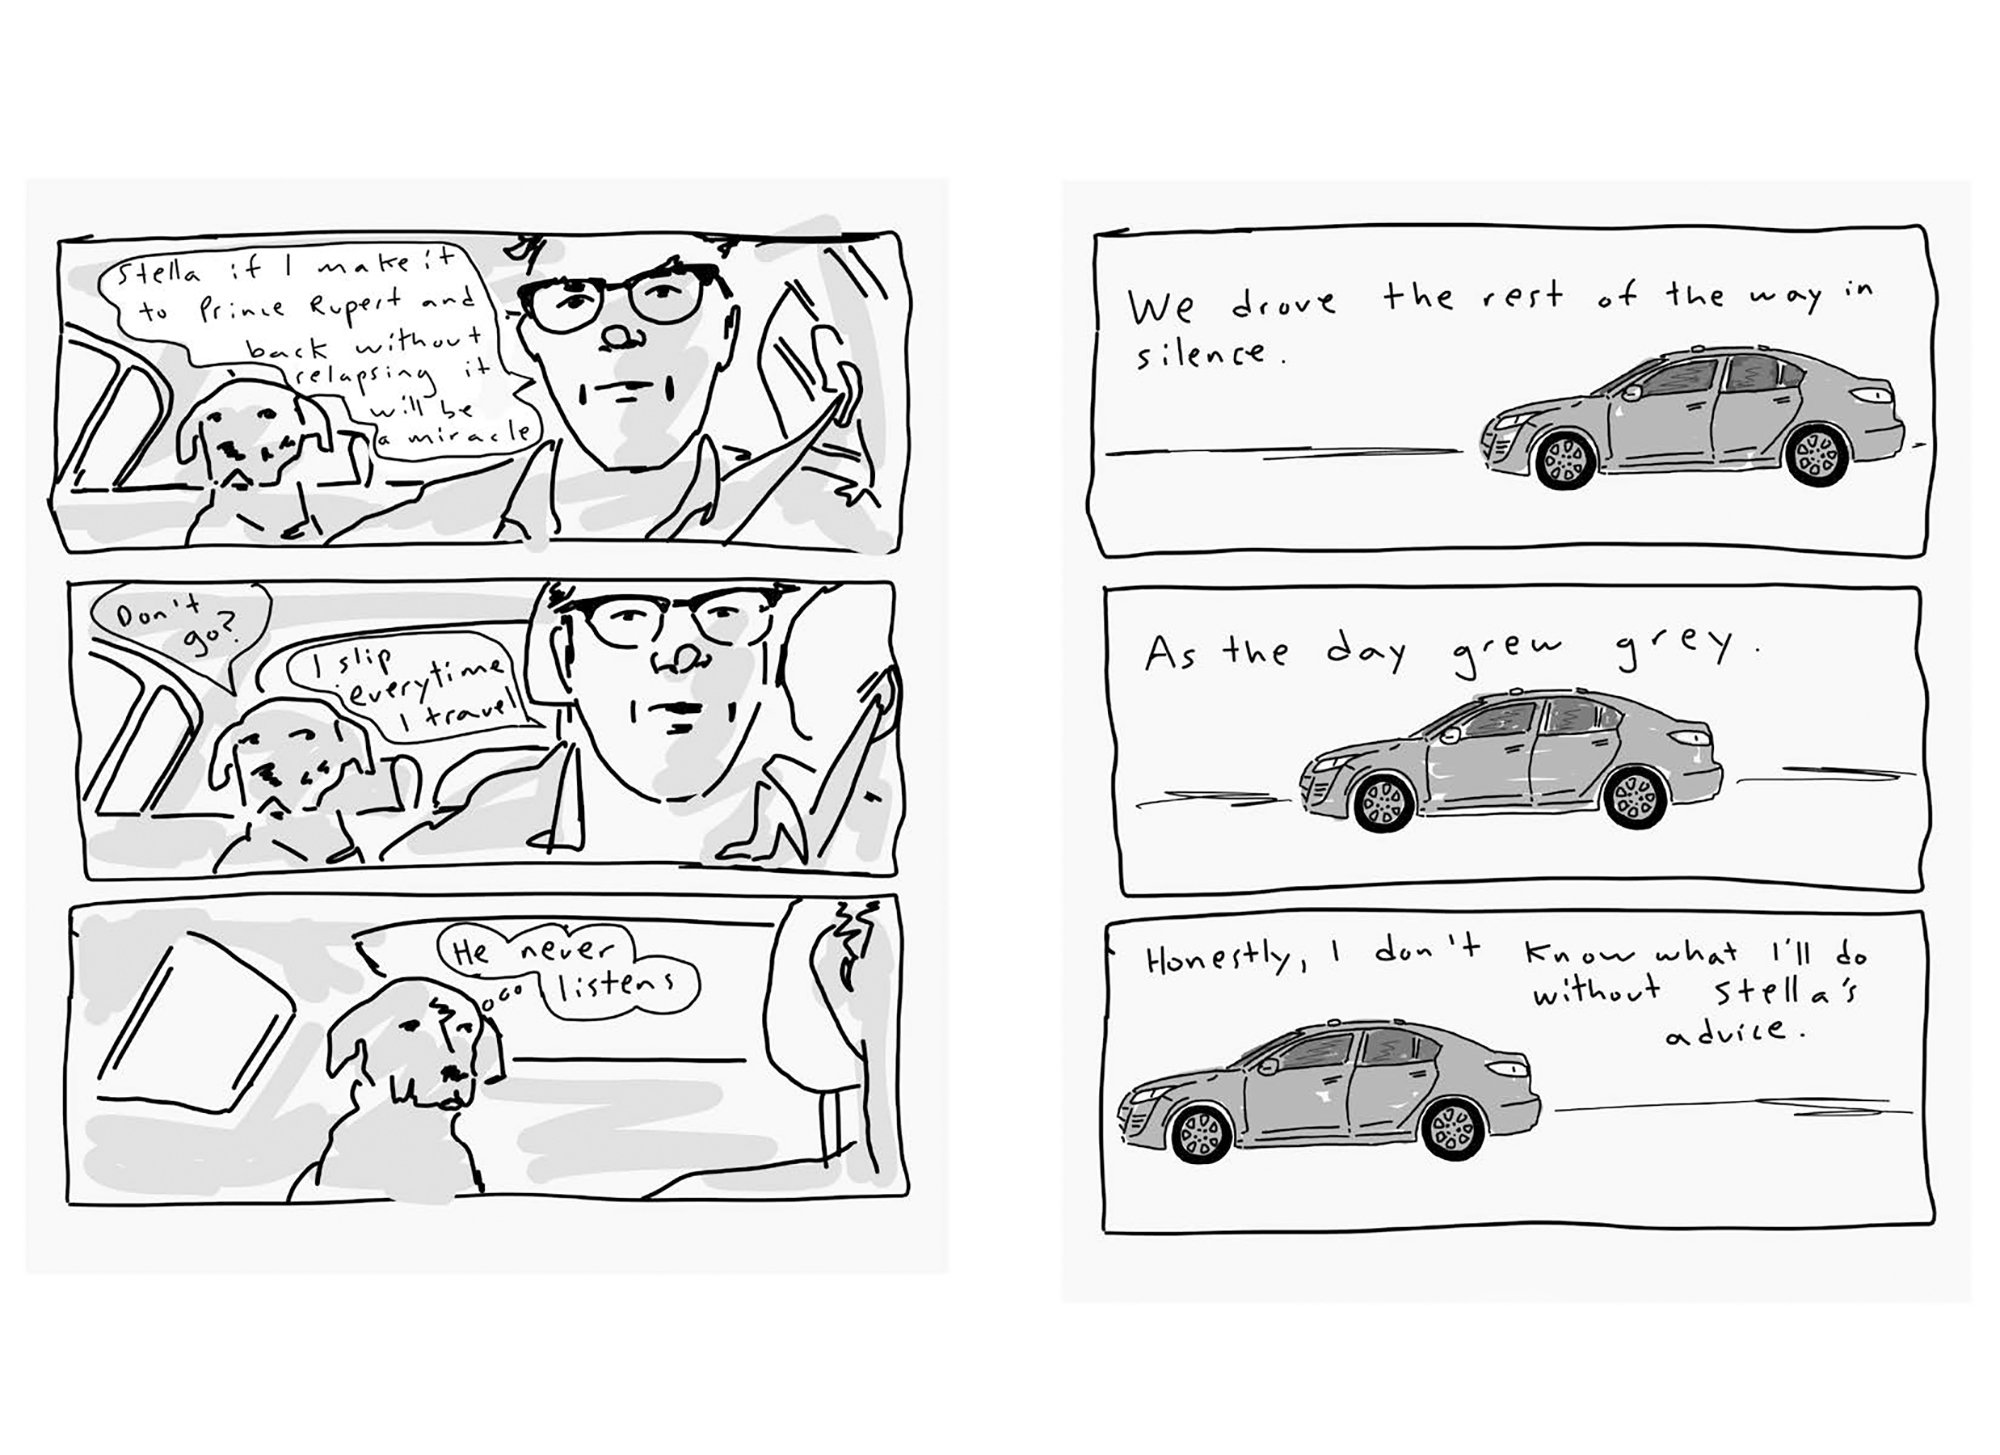 Over a series of six comic panels, a man driving a car has a conversation with his dog, Stella, about his concern that he might relapse into drinking on his cross-country journey.